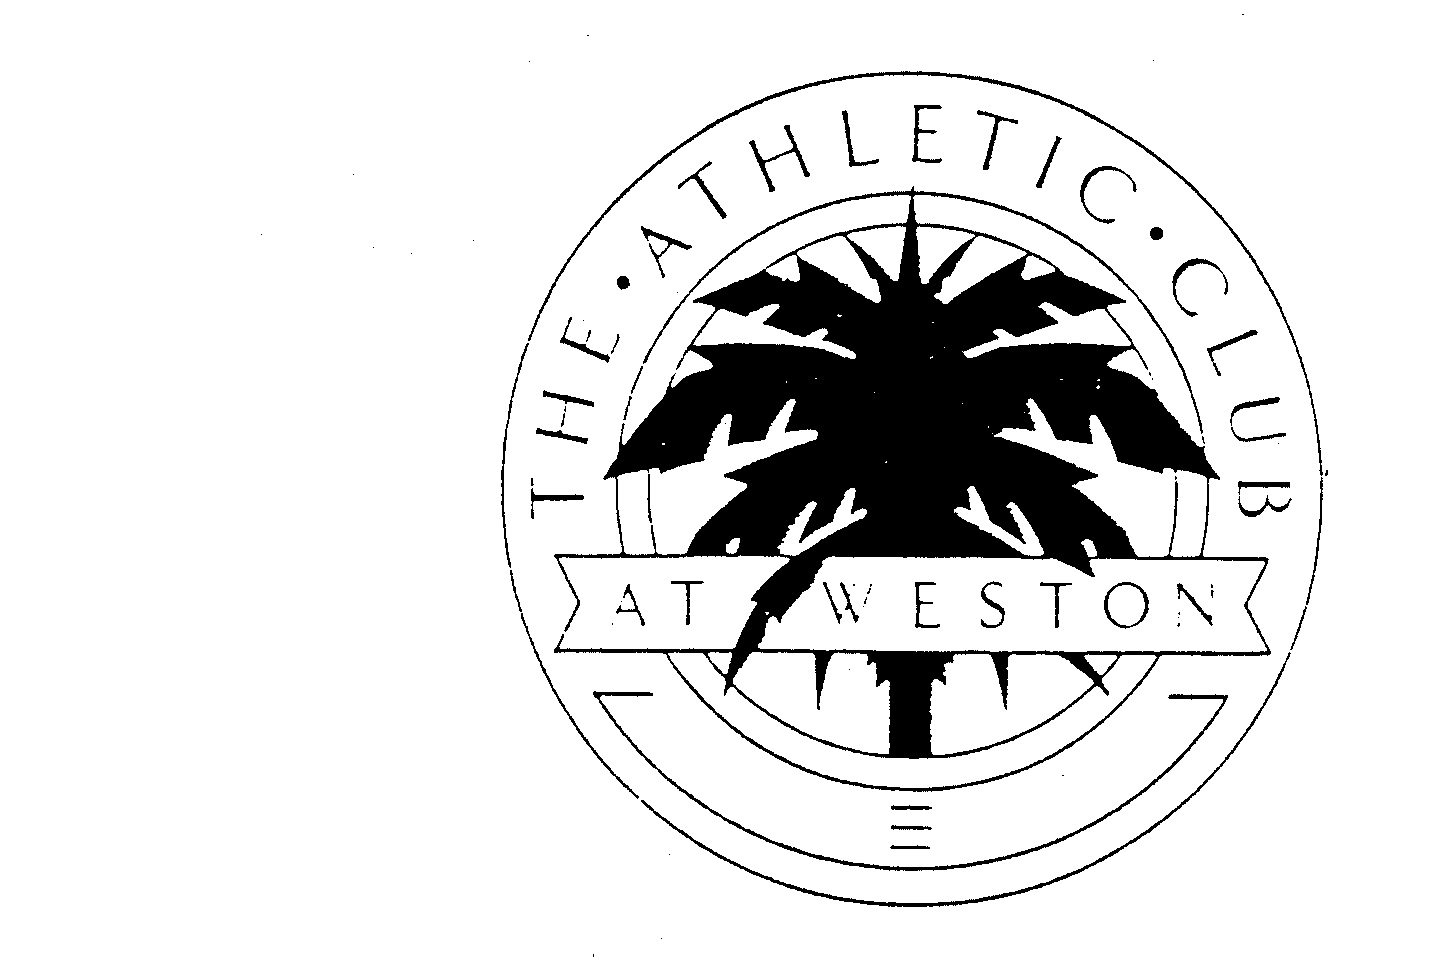  THE - ATHLETIC - CLUB AT WESTON